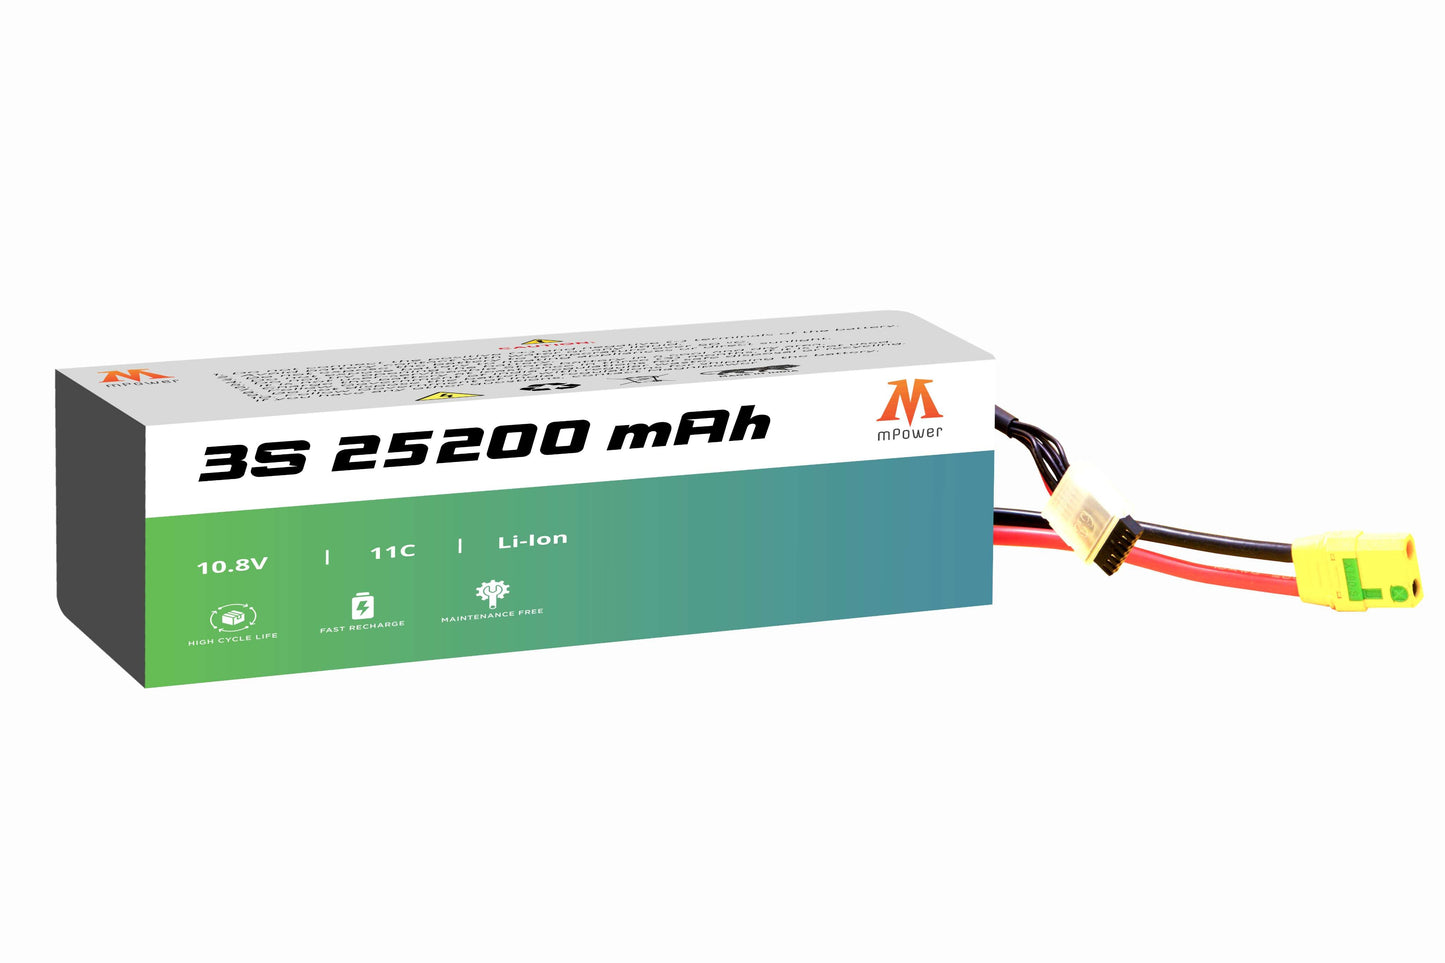 mPower 3S 25200mAh Lithium-Ion Battery for Surveillance Drones